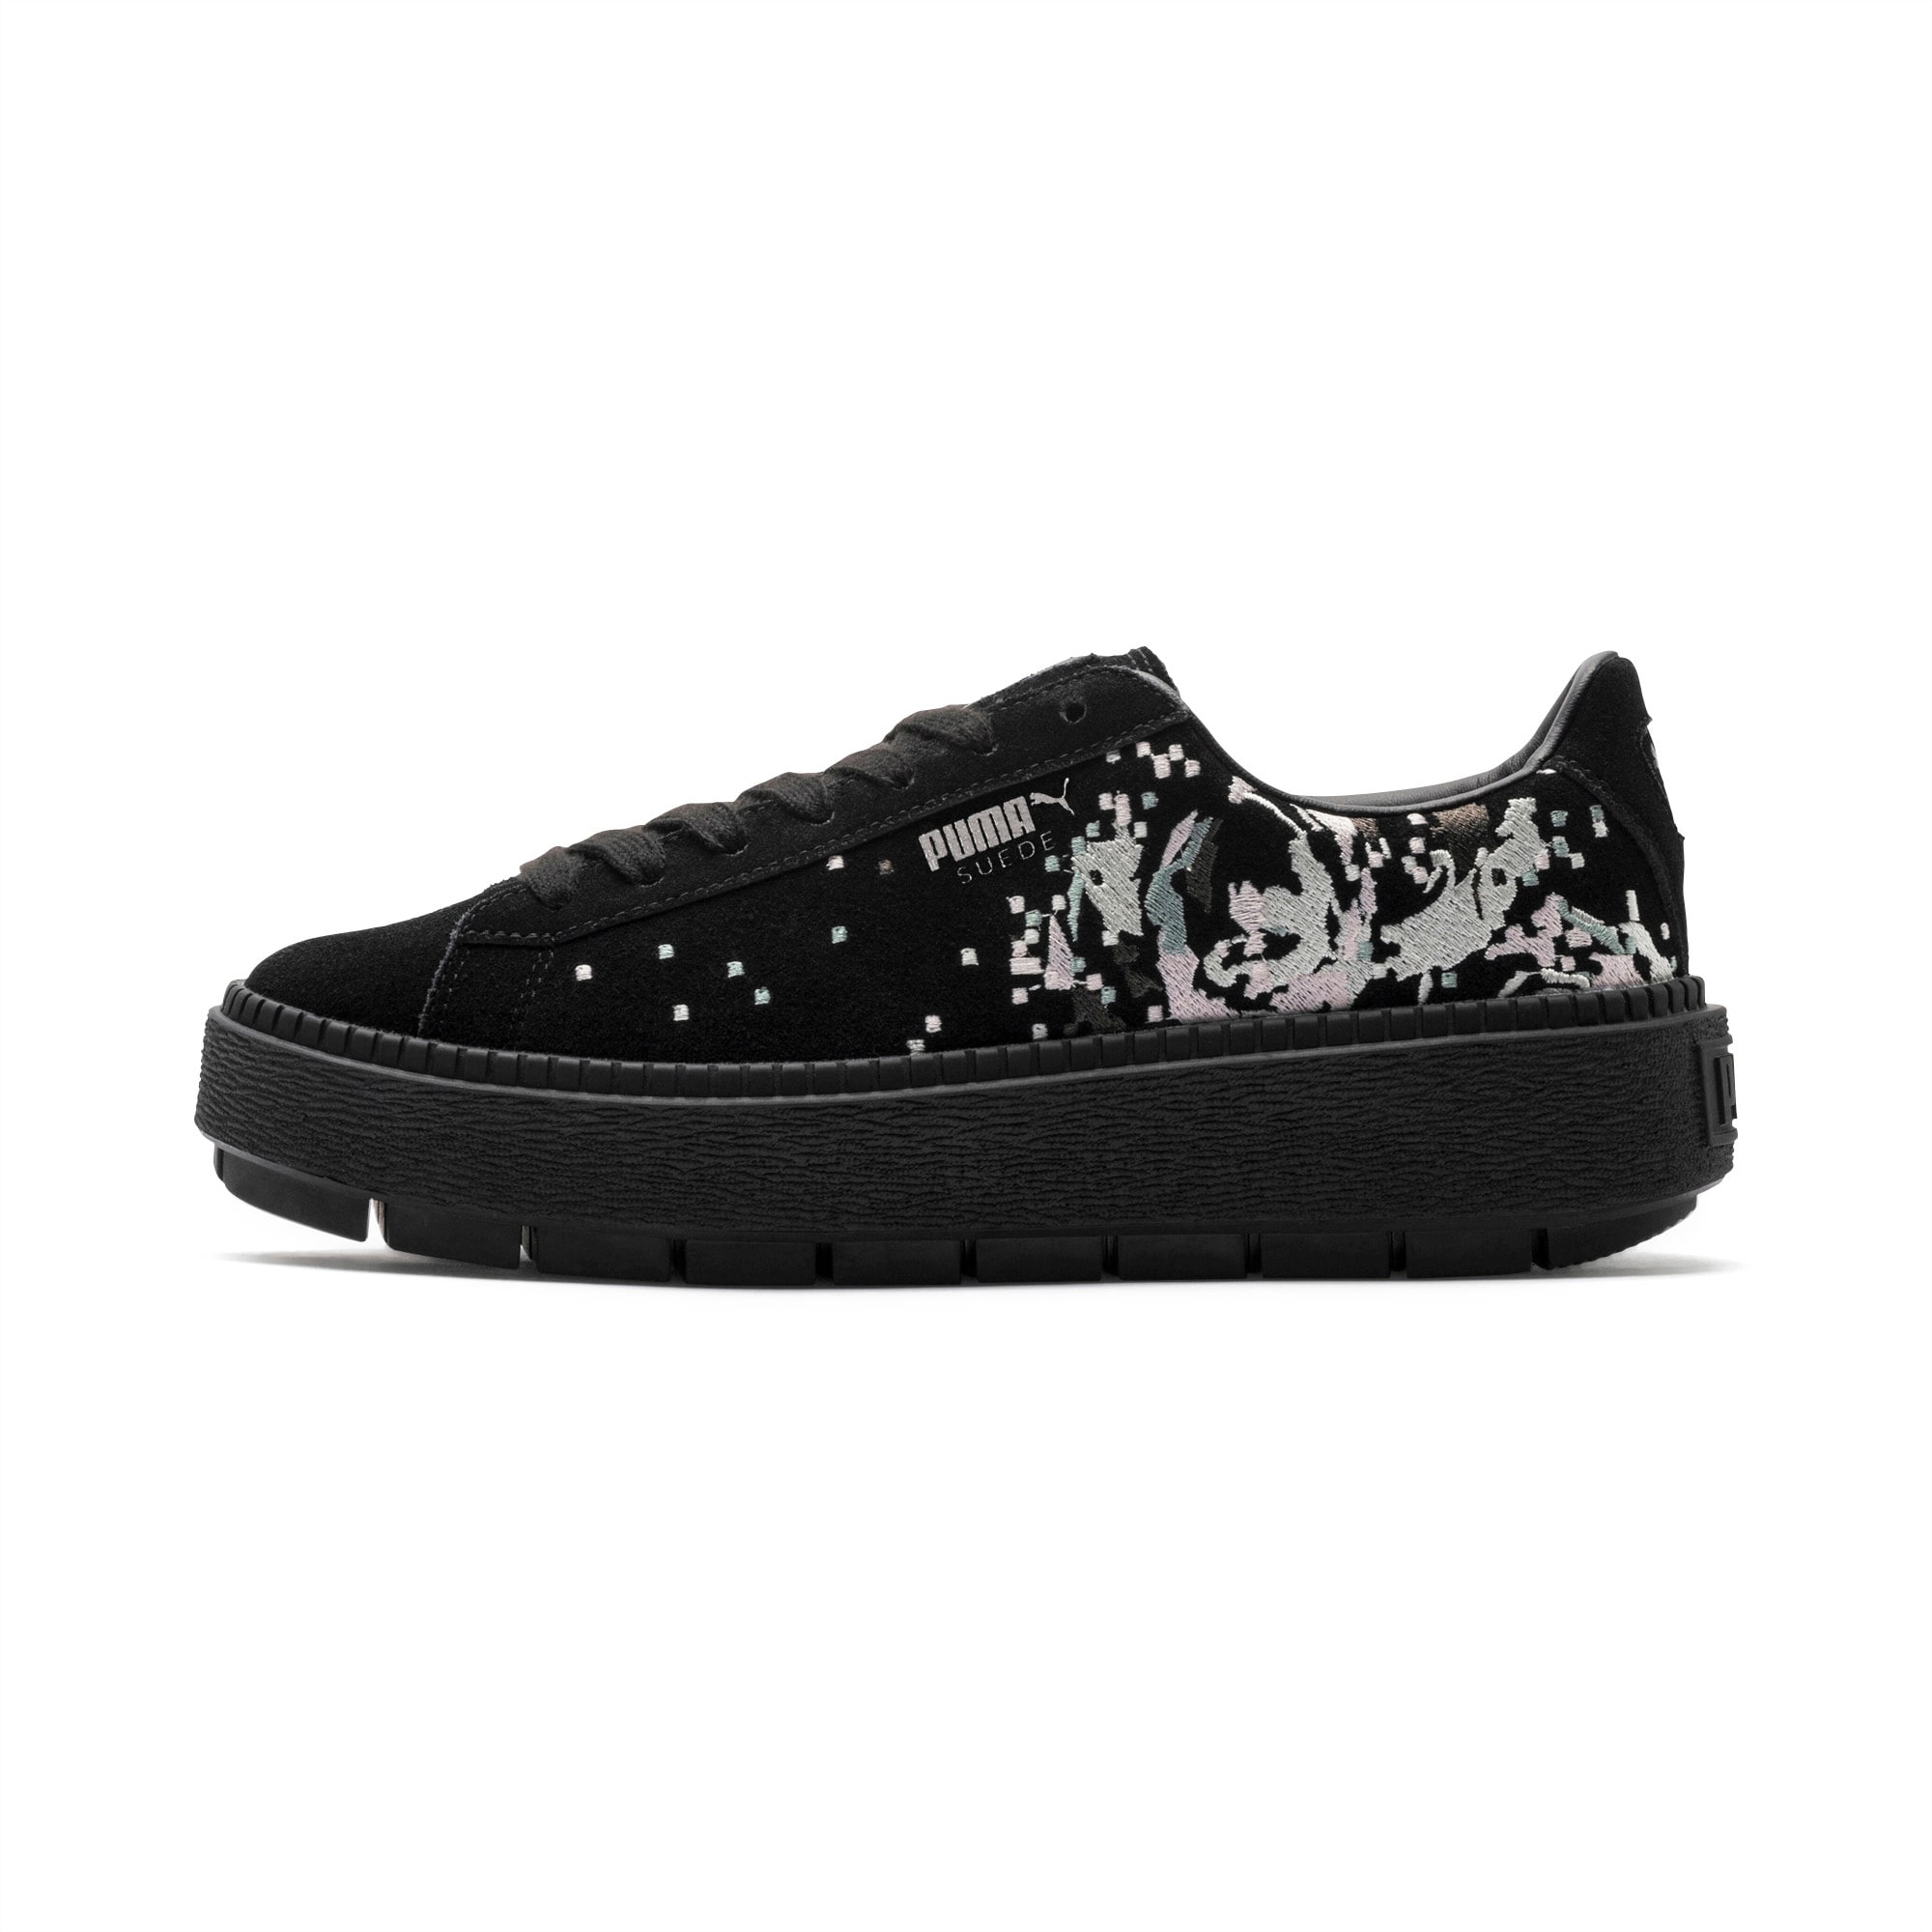 puma suede platforms in white with embroidery